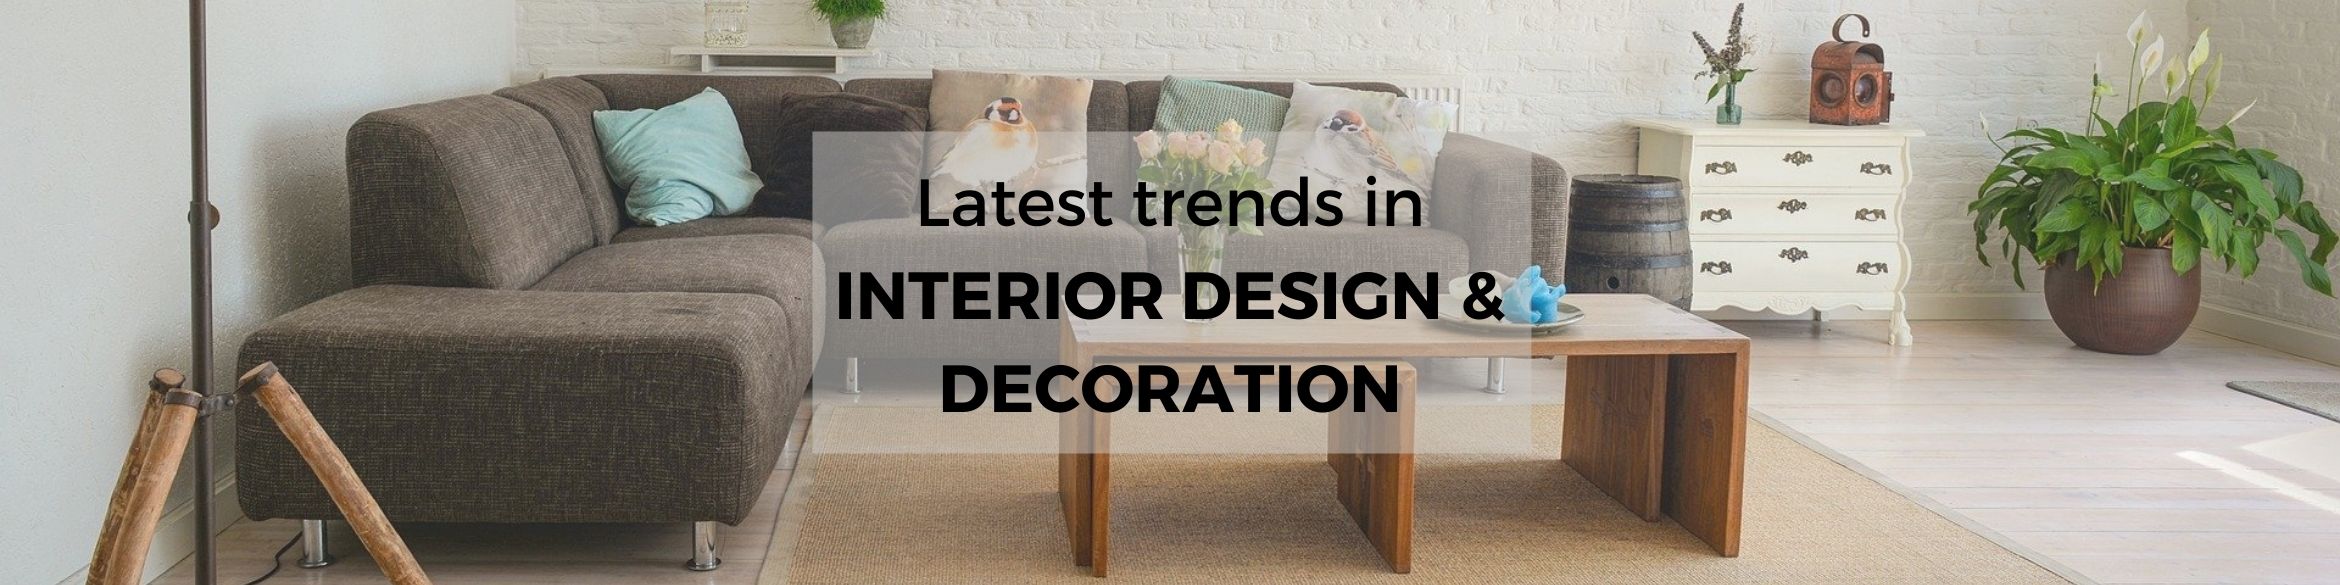 INTERIOR DESIGN TRENDS ON 2022 TO DECORATE YOUR HOUSE